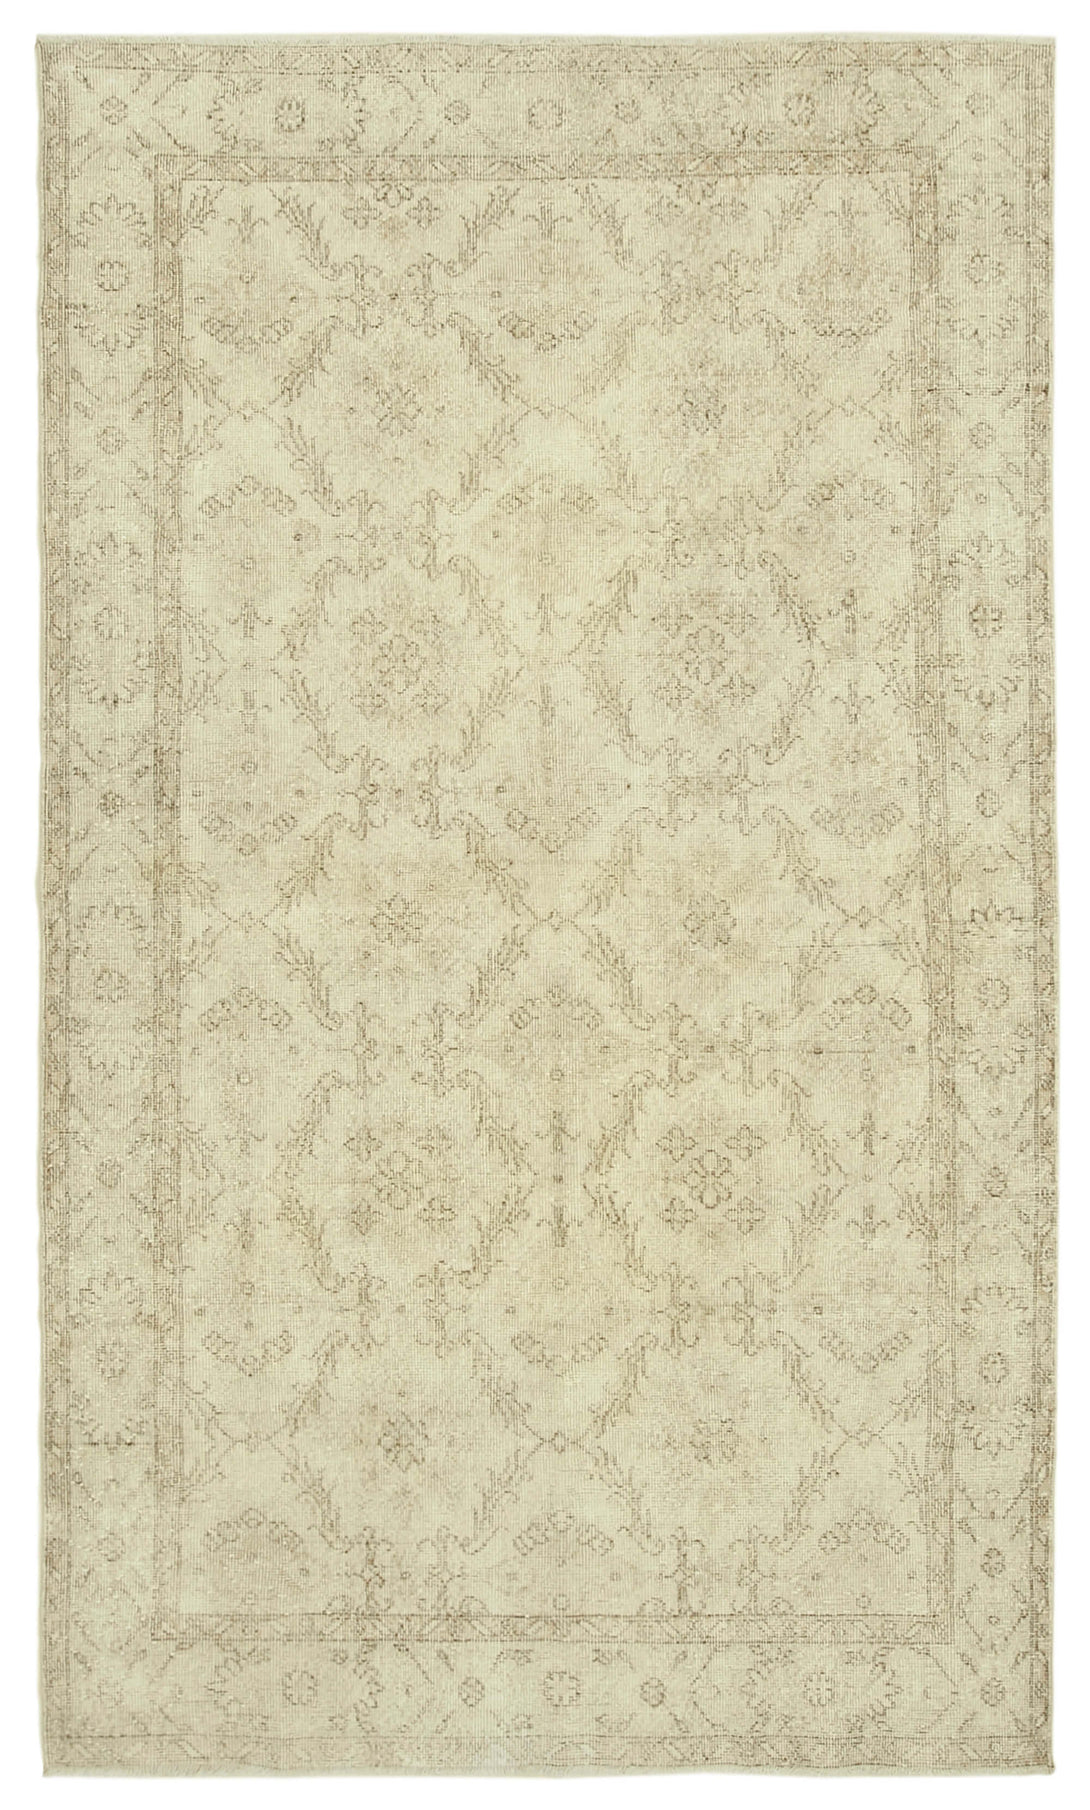 Handmade White Wash Area Rug > Design# OL-AC-39023 > Size: 5'-7" x 9'-9", Carpet Culture Rugs, Handmade Rugs, NYC Rugs, New Rugs, Shop Rugs, Rug Store, Outlet Rugs, SoHo Rugs, Rugs in USA